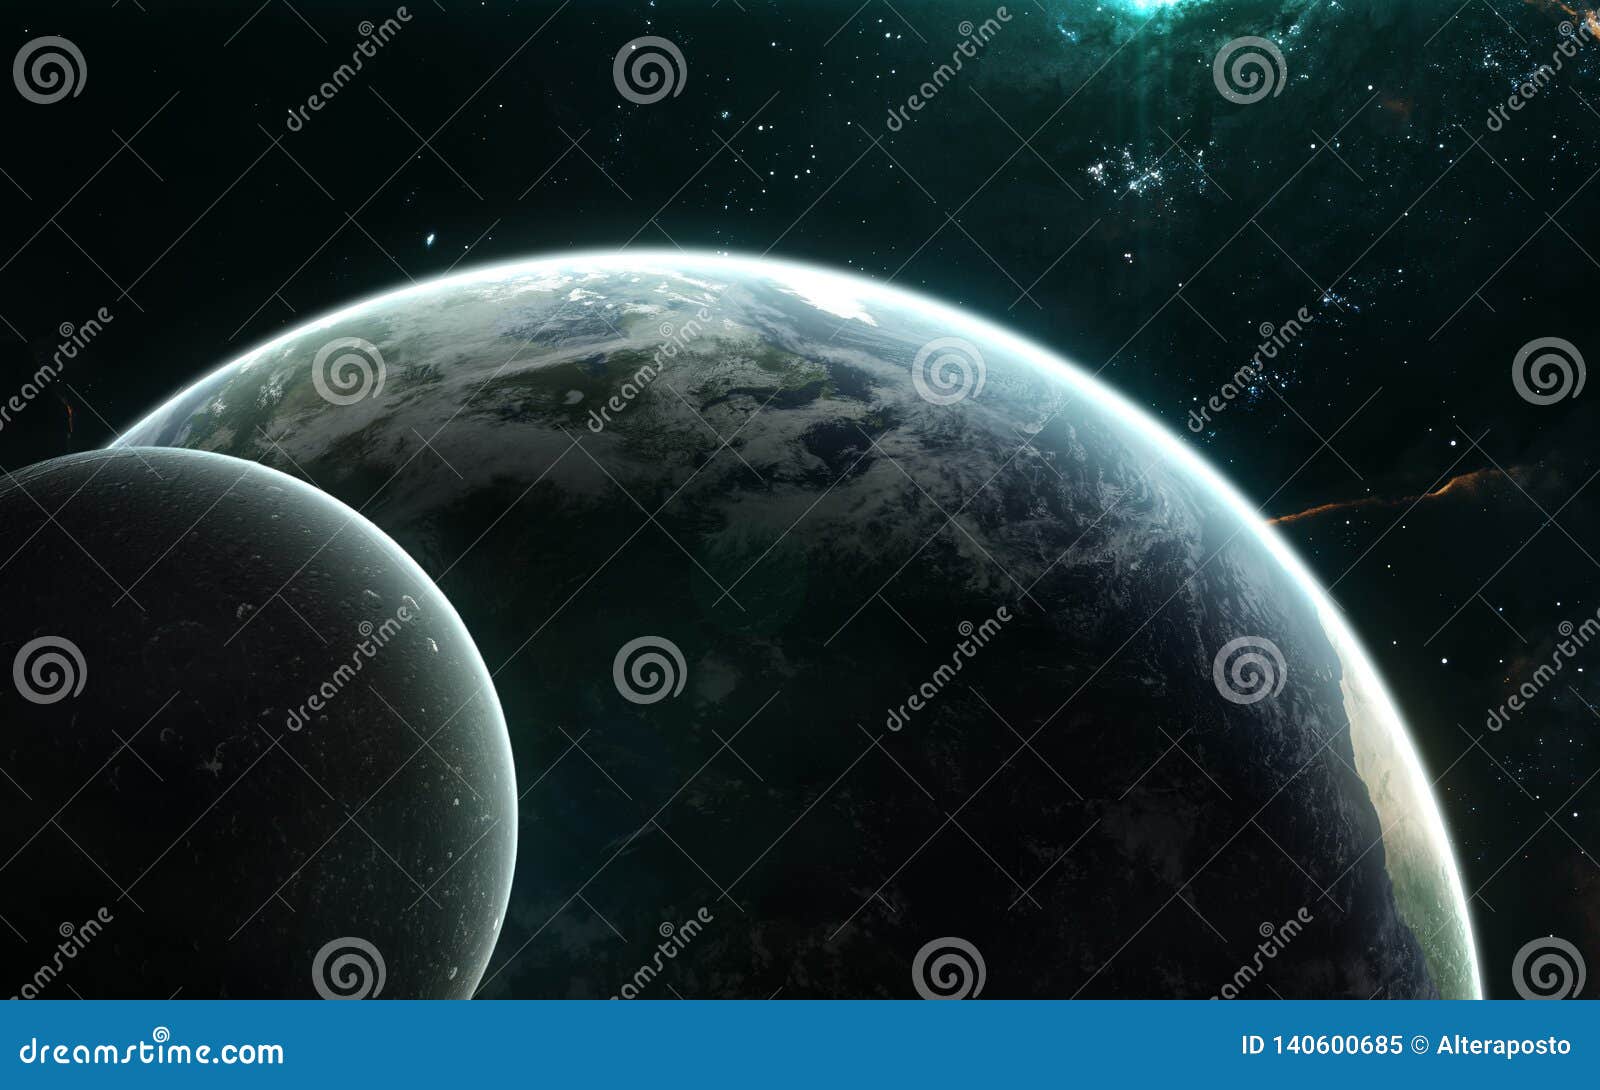 Planet Earth And Moon In Turquoise Light Solar System